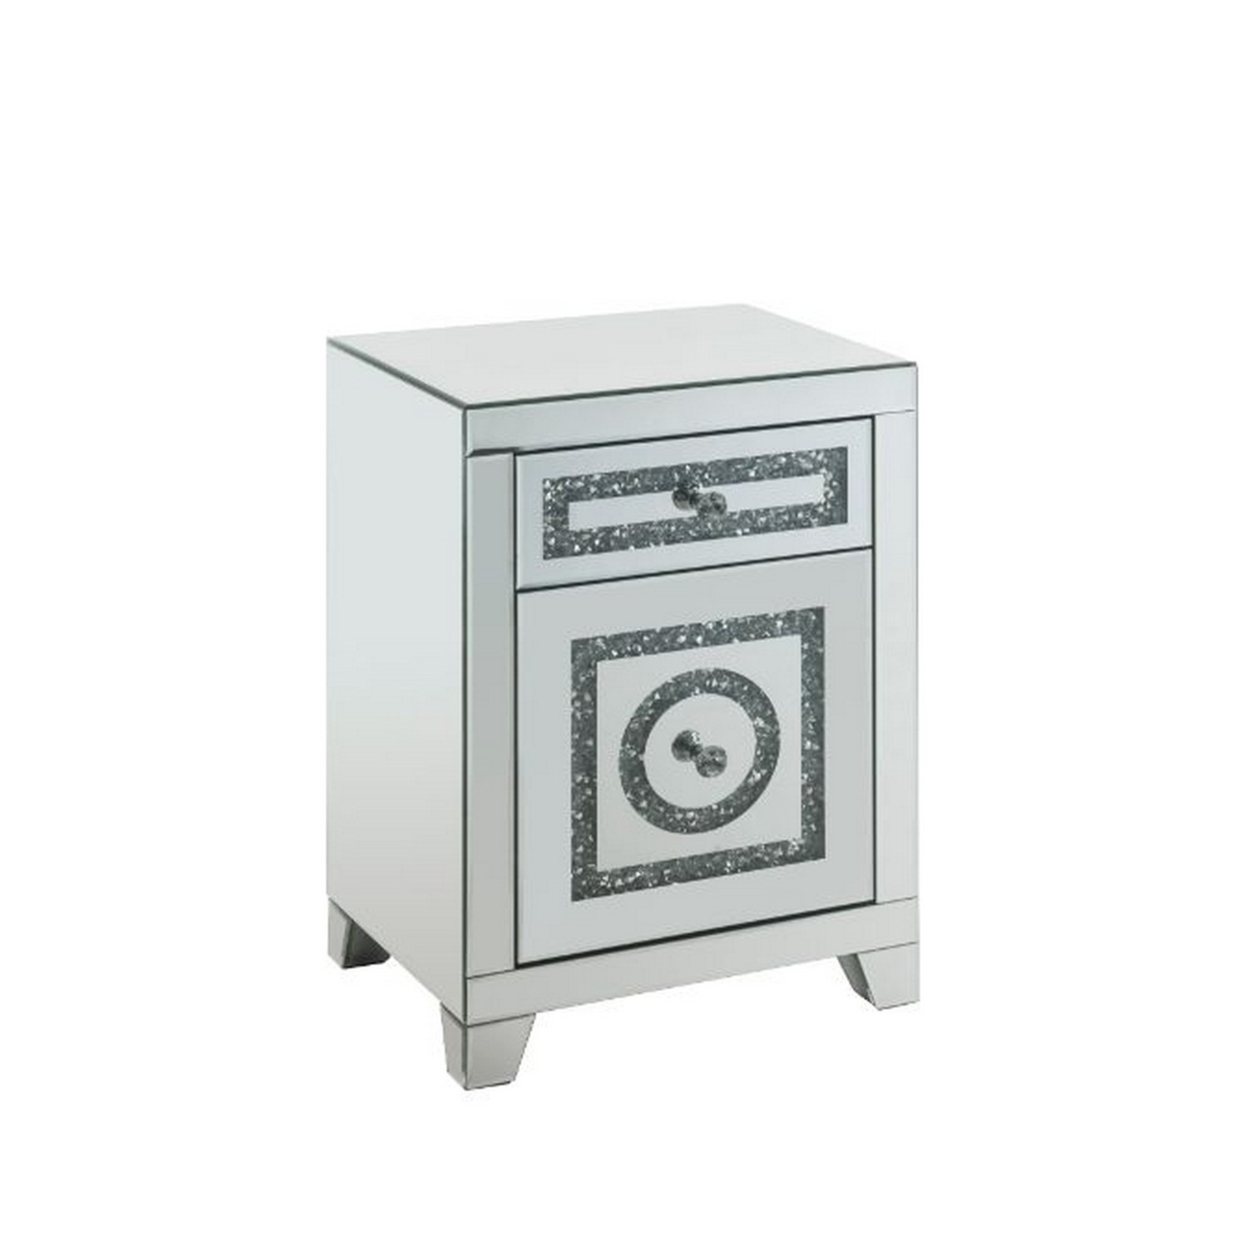 Accent Table With 2 Storage Drawers And Safety Top Feature, White- Saltoro Sherpi